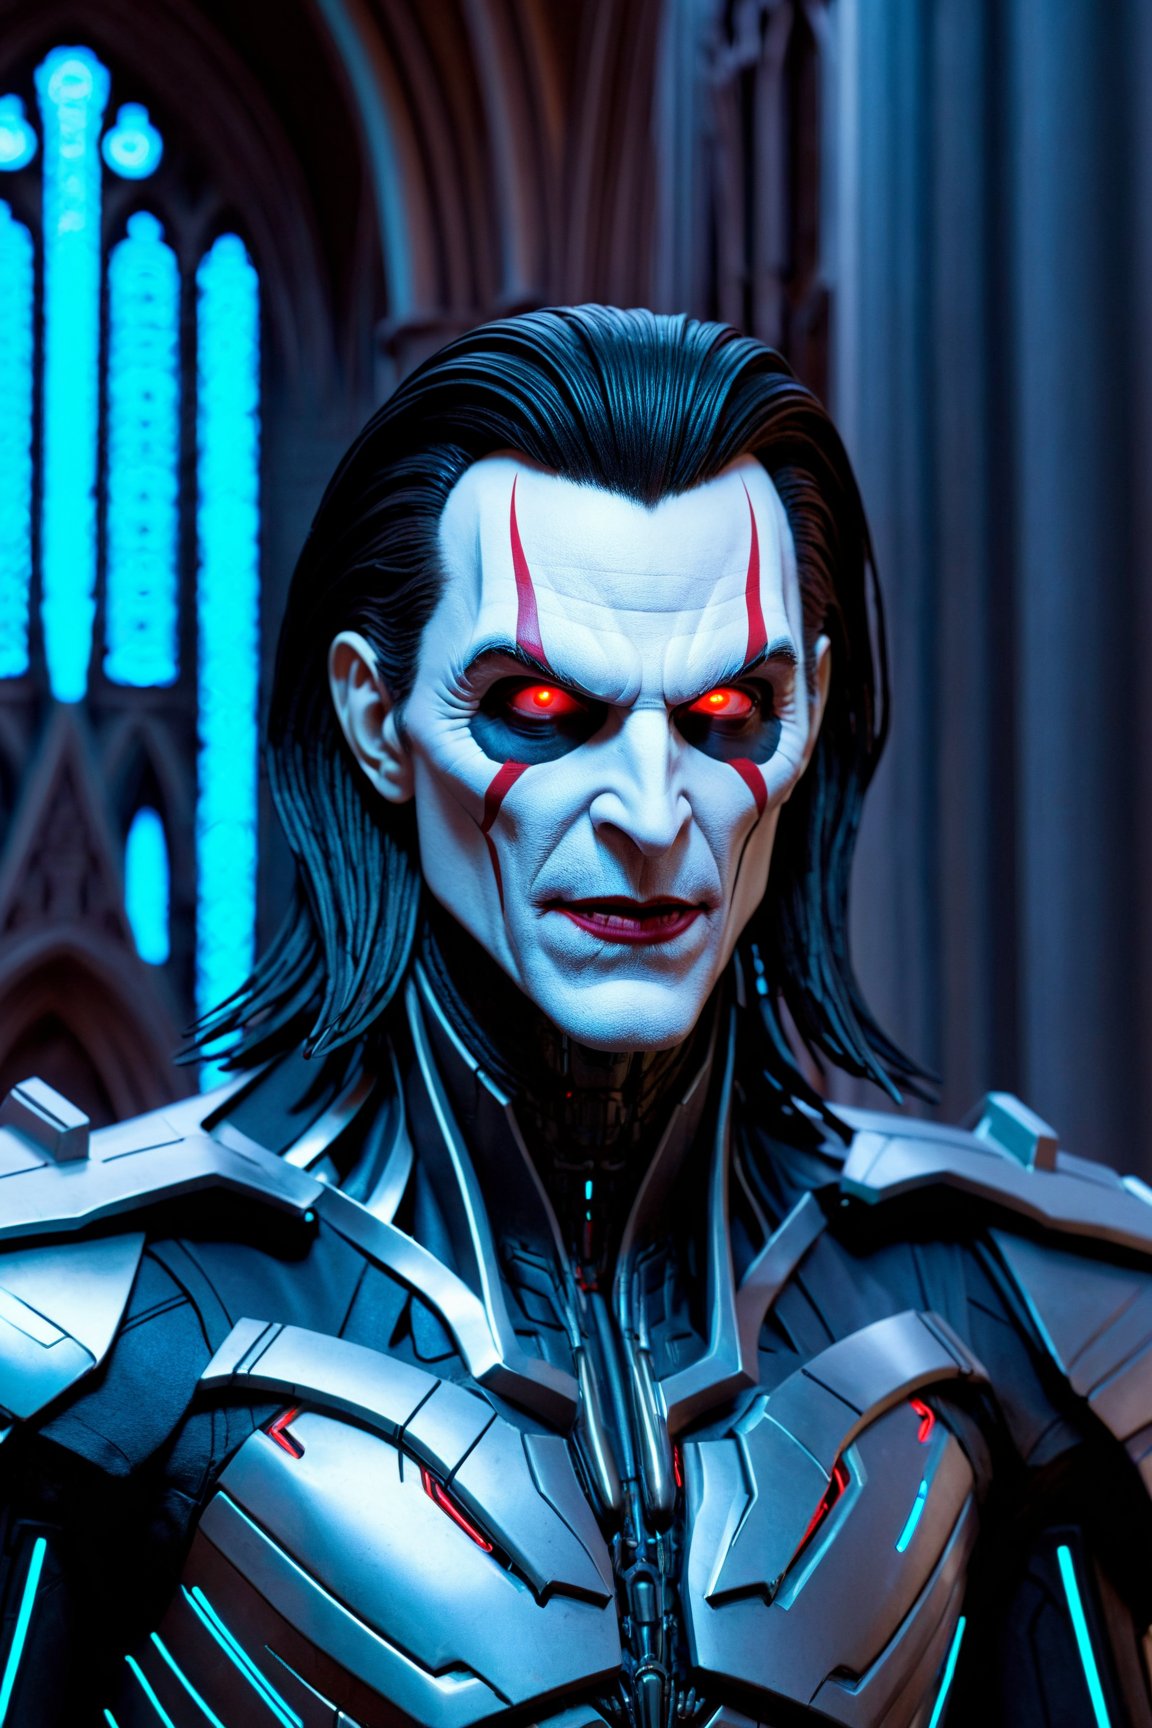 (Morbius from Marvel,  portrayed with hyper-realistic perfection and Joker-style hair),  (Biomechanical robot in a cyberpunk cathedral),  This award-winning photo,  featured on Zbrush Central,  captures Morbius in a hyper-realistic portrayal with a distinct Joker-style hairdo. The intricate biomechanical details,  extremely sharp lines,  and the presence of a cybernetic limb complement the cyberpunk atmosphere of a gothic brutalist cathedral illuminated by neon lights.,<lora:EMS-89317-EMS:0.800000>